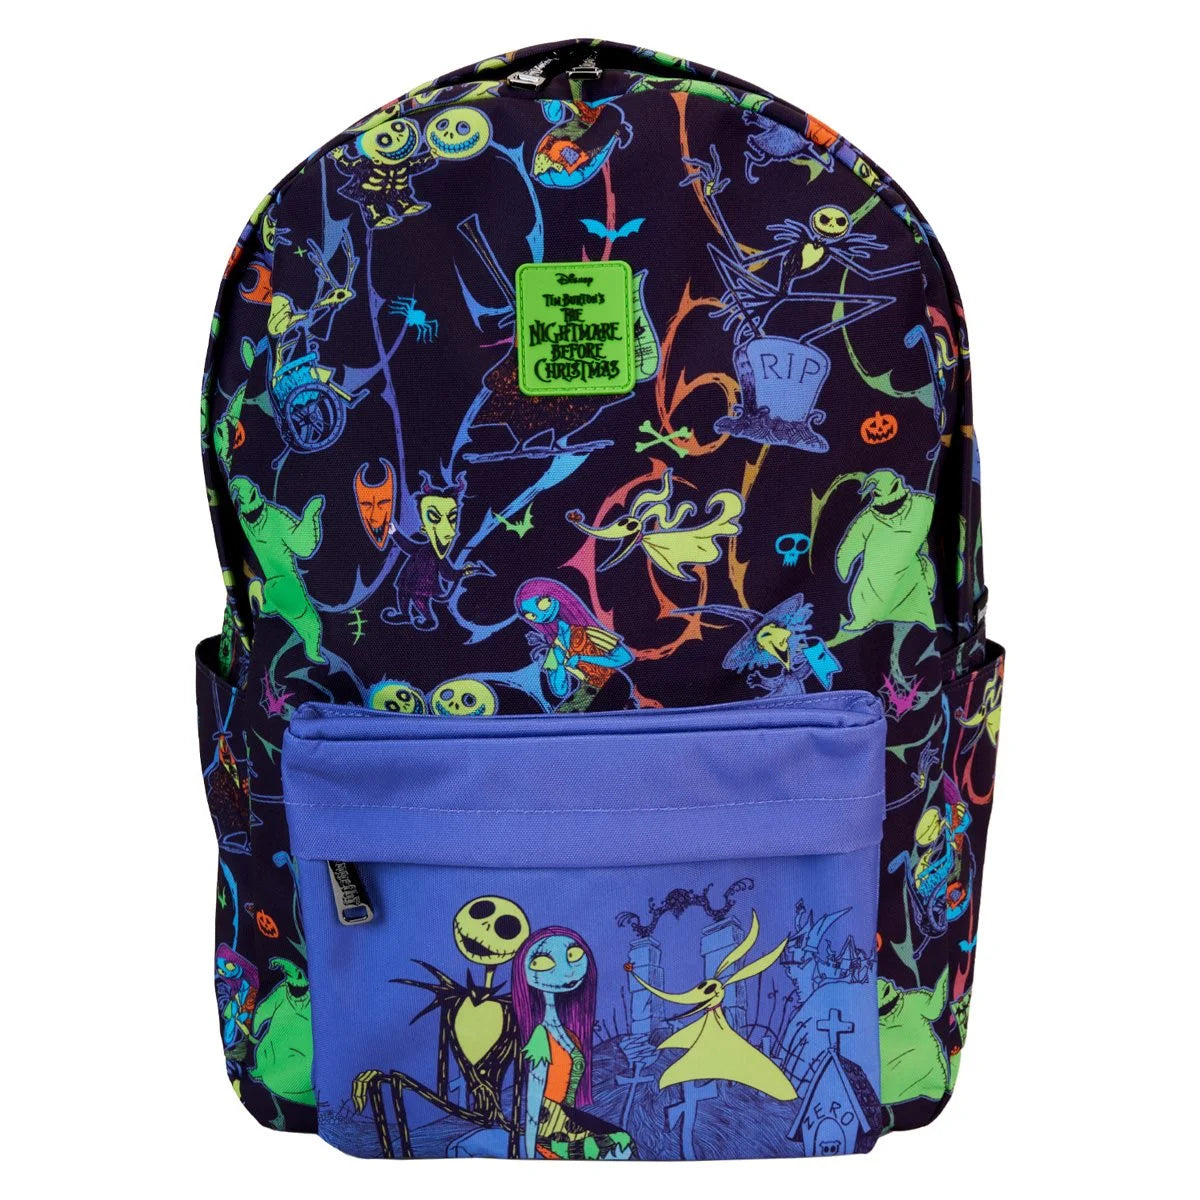 Loungefly - The Nightmare Before Christmas: Nightmare Before Christmas Full-Size Backpack (Pre-Order)